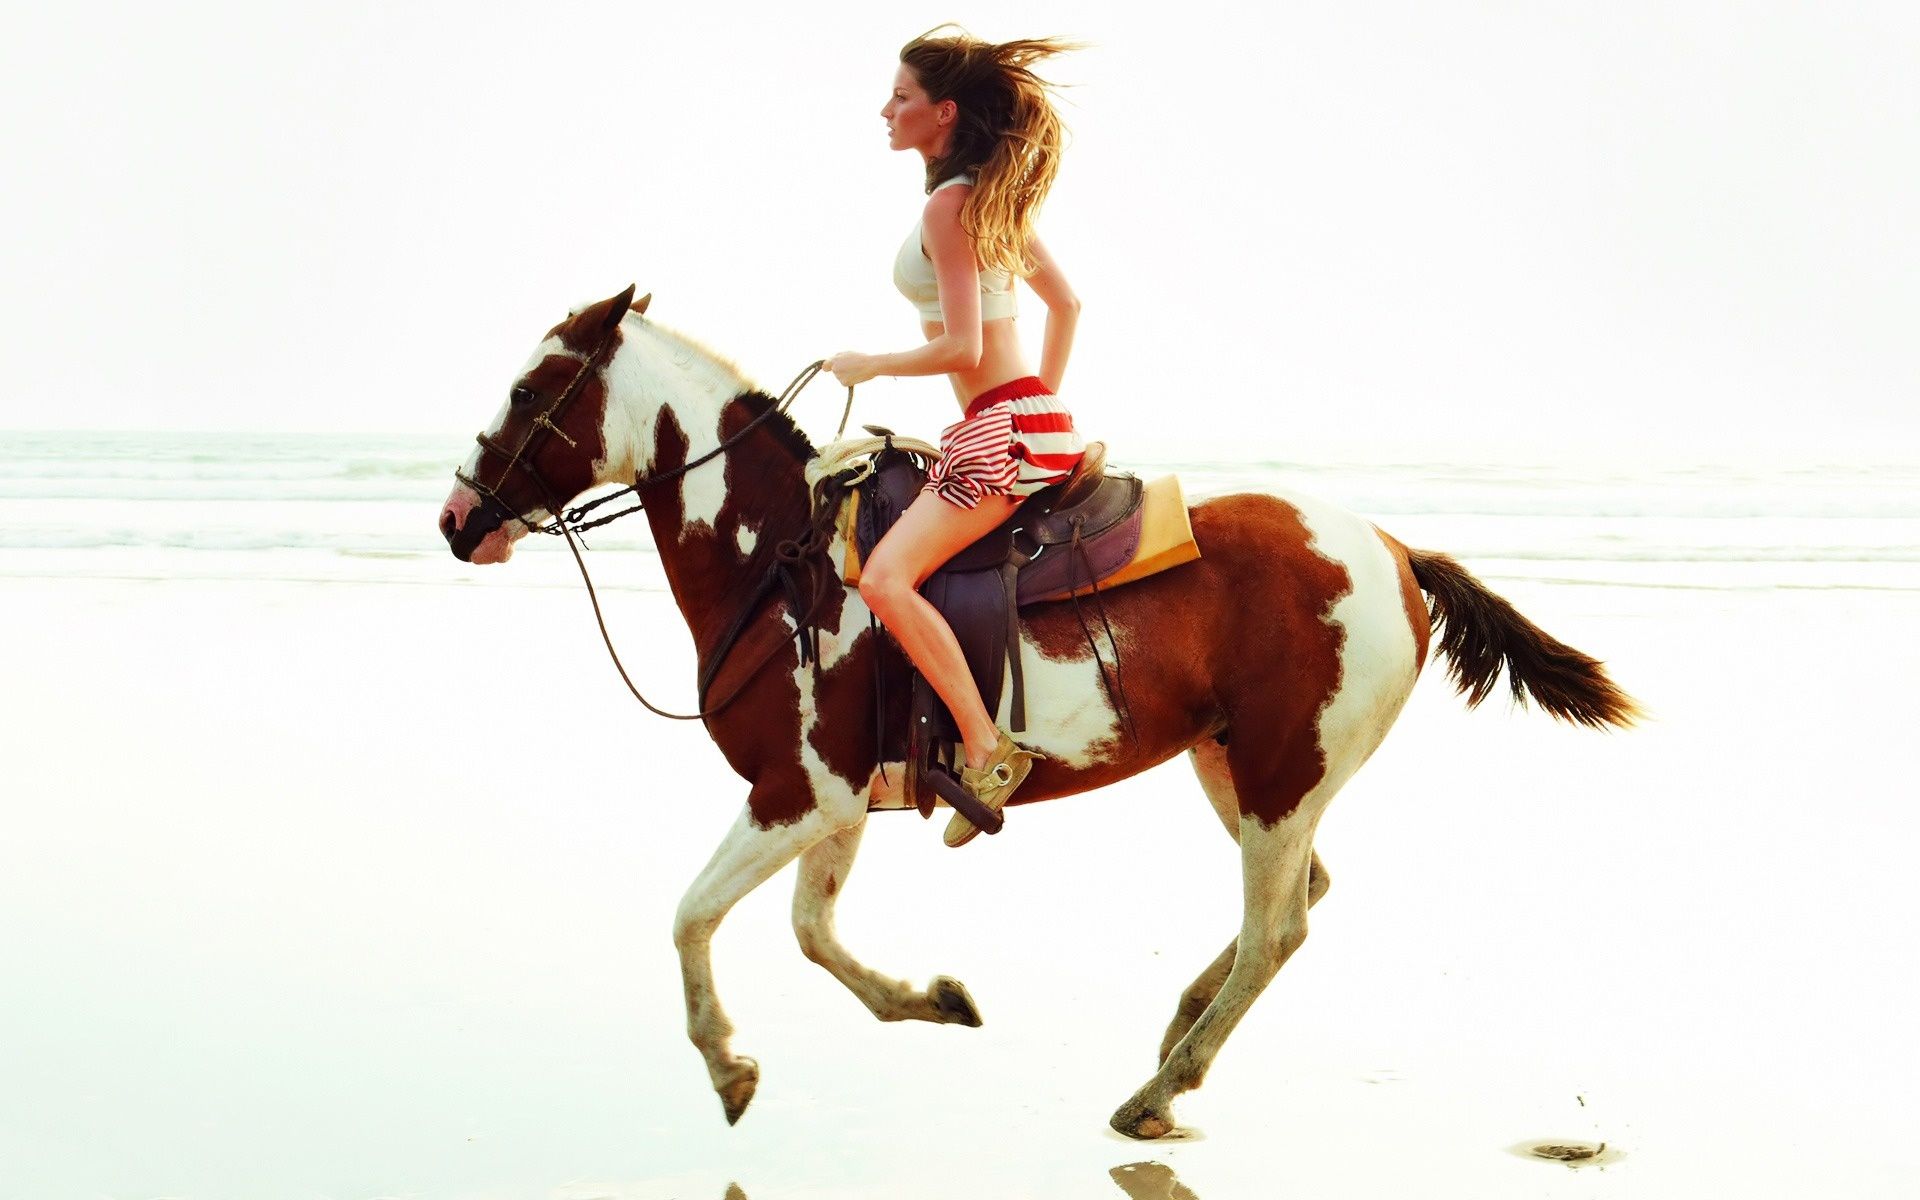 Preety Girl Riding Horse On The Beach 1920x1200 WIDE Horse Riding